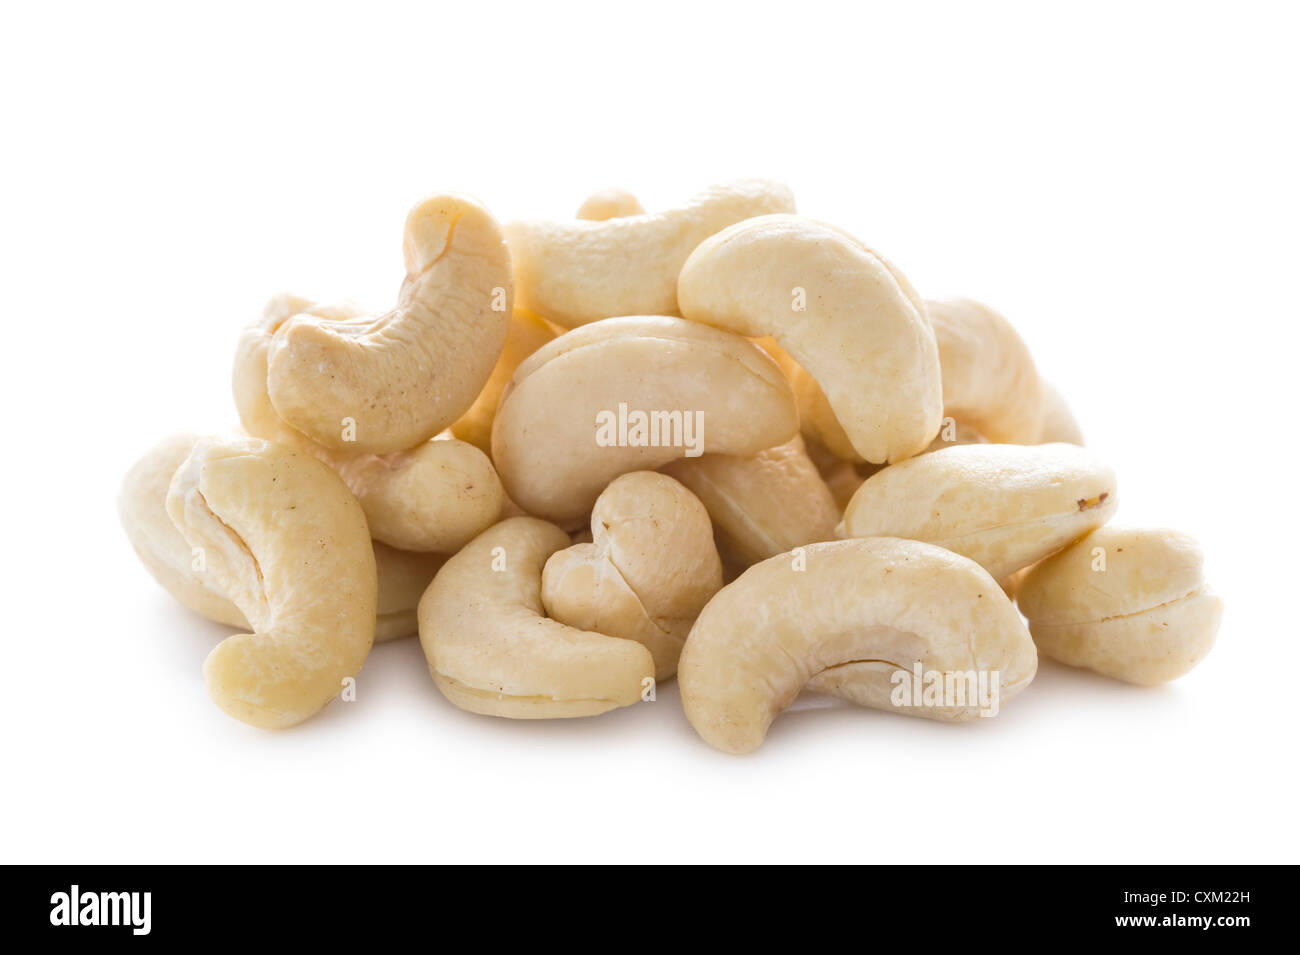 a heap of raw unsalted cashew nuts isolated on white Stock Photo